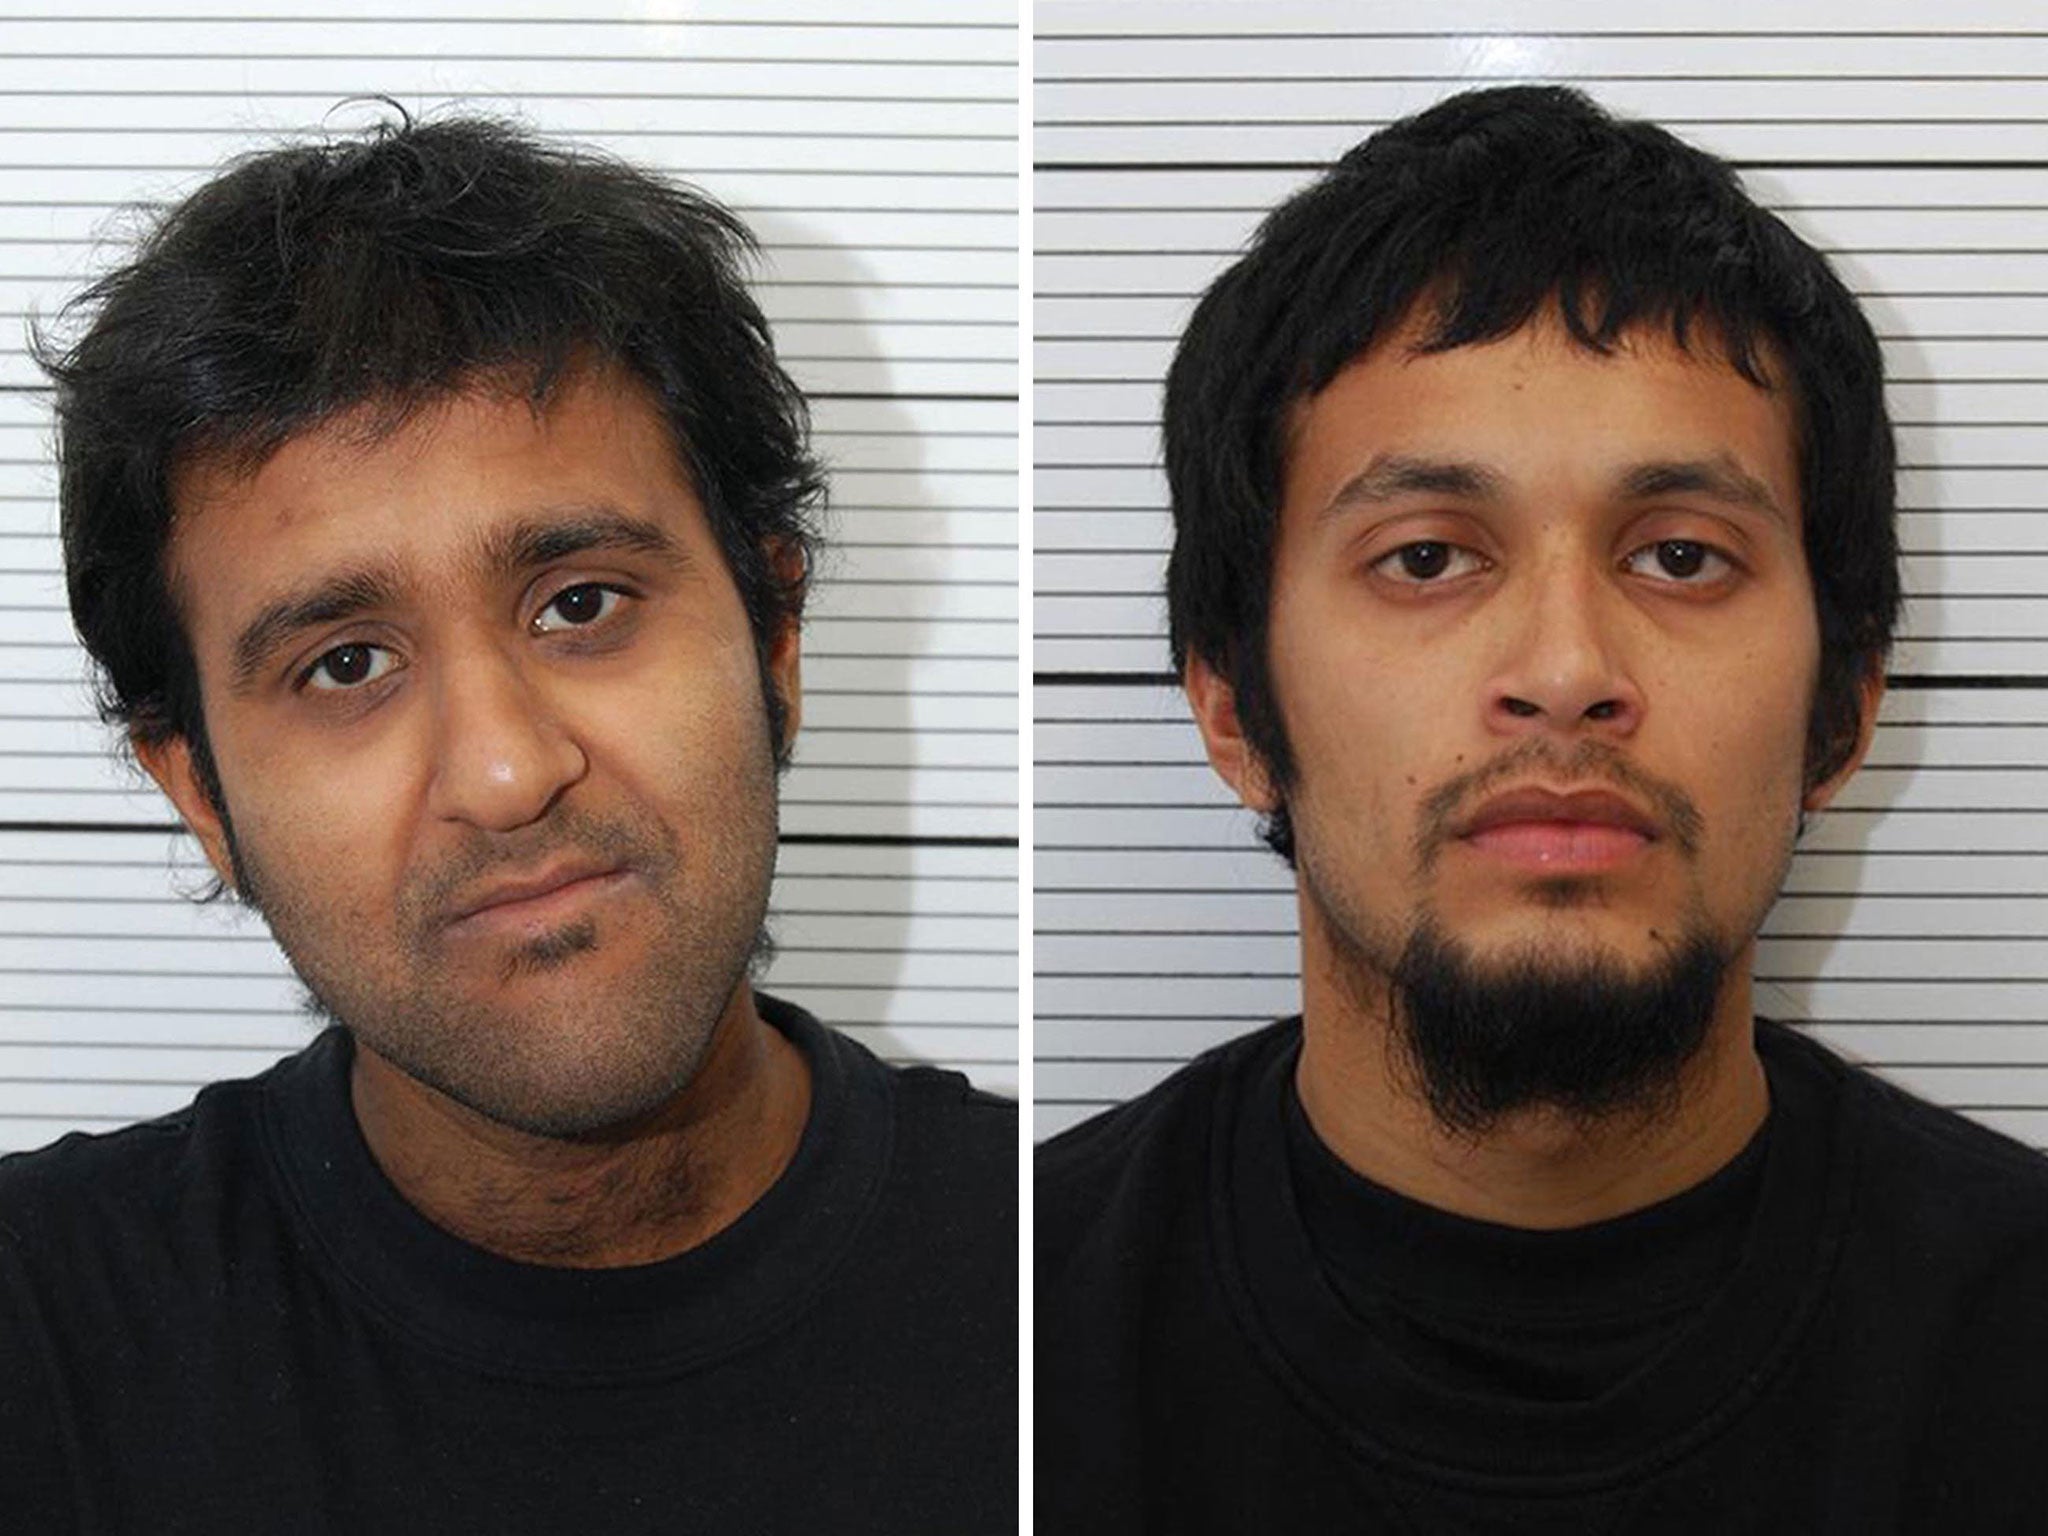 Mohammed Nahin Ahmed and Yusuf Zubair Sarwar admitted spending eight months with an al-Qaeda-linked group